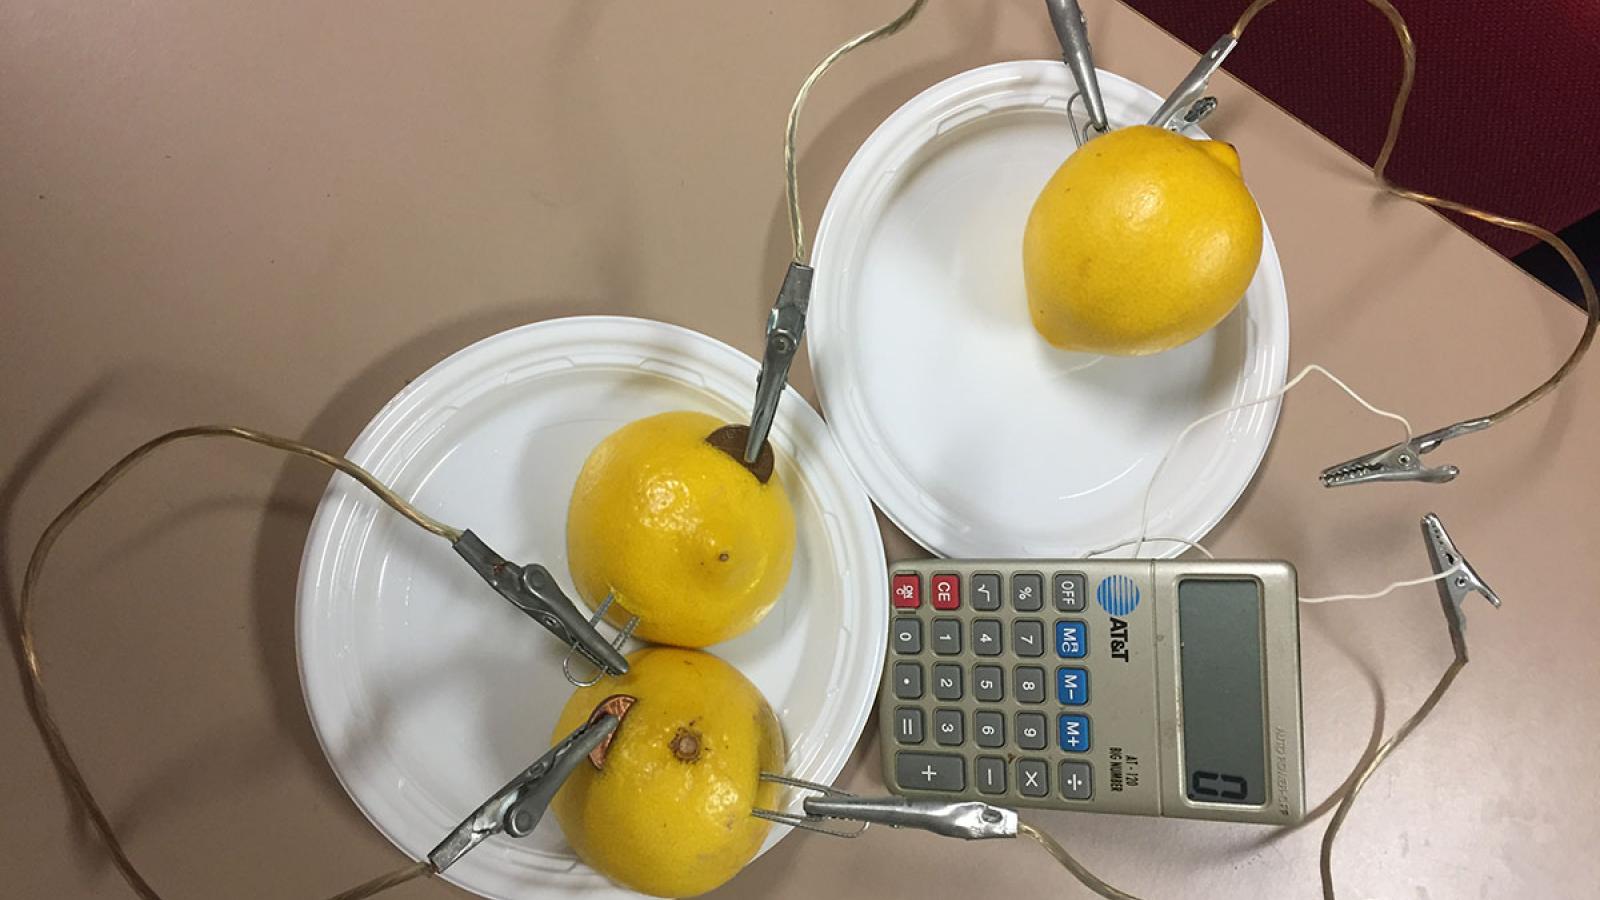 Photograph of a calculator being powered by lemons 